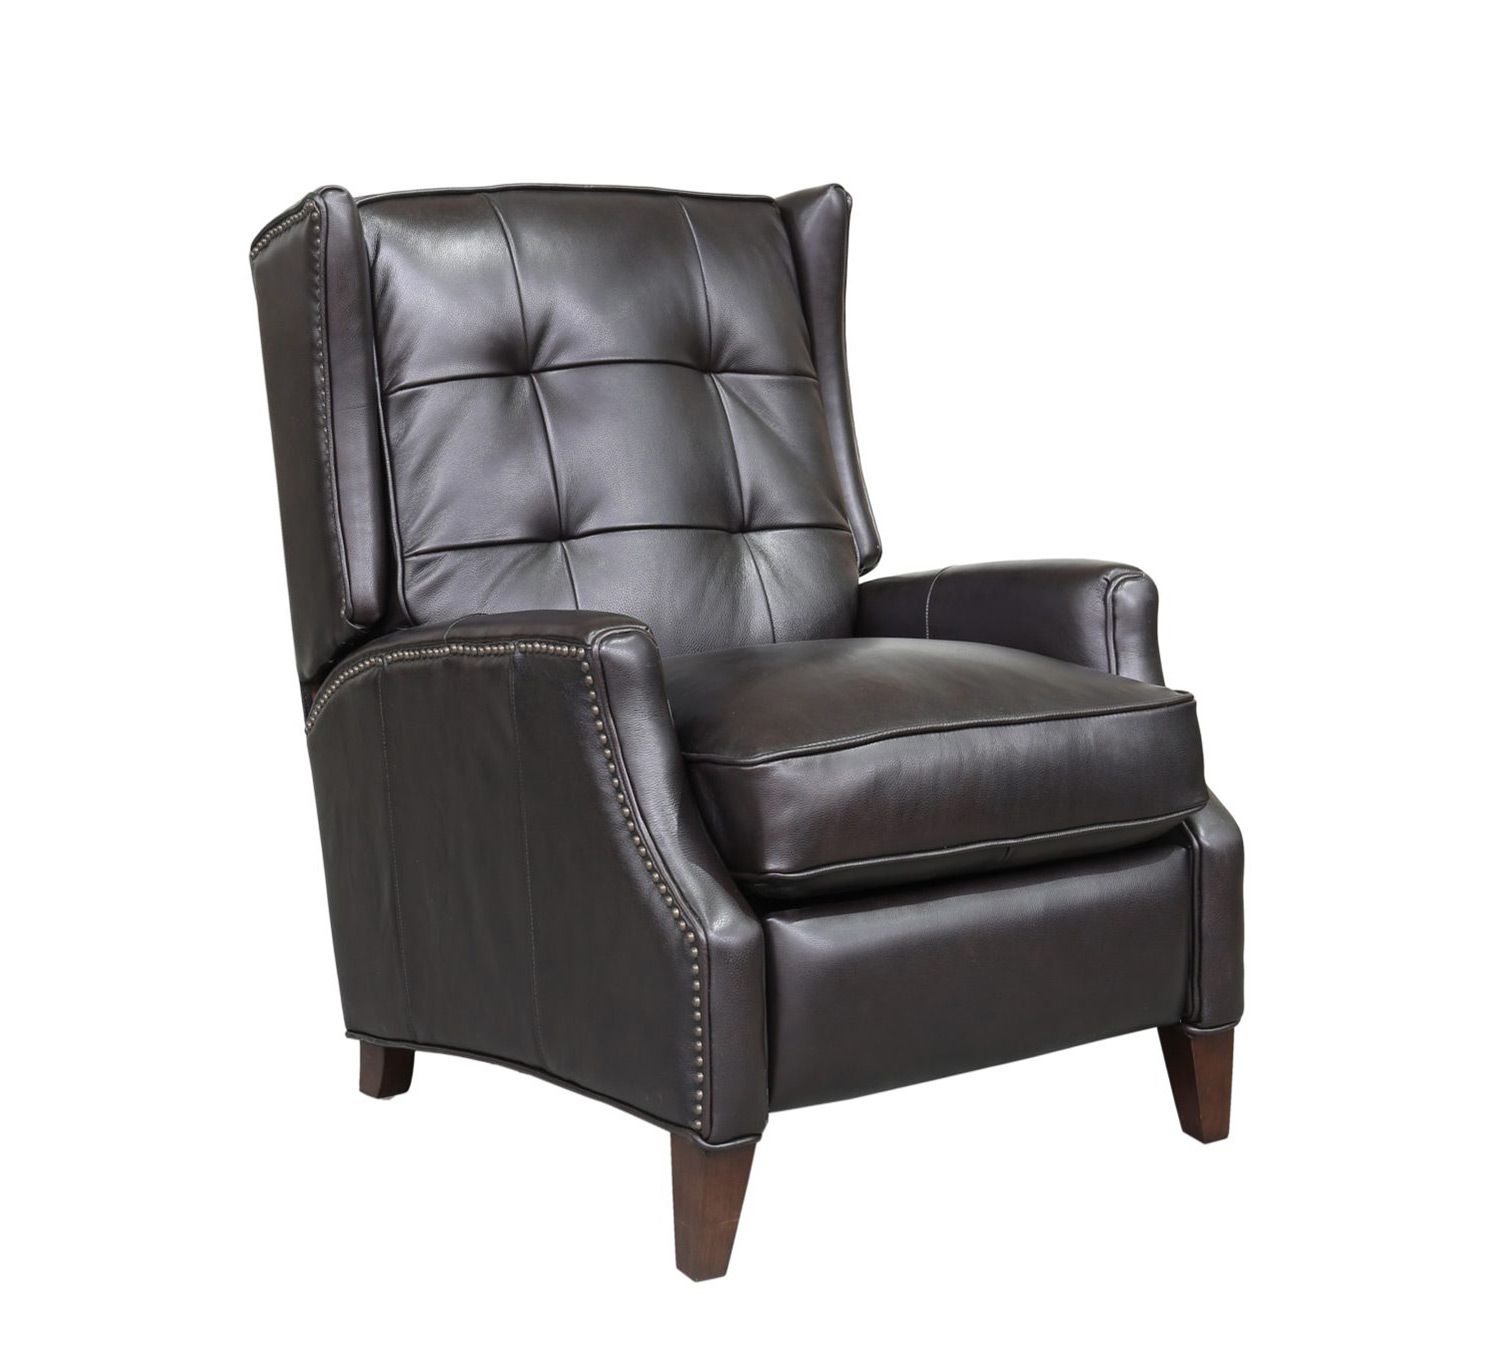 Barcalounger Lincoln Recliner Chair - Shoreham Fudge/all leather